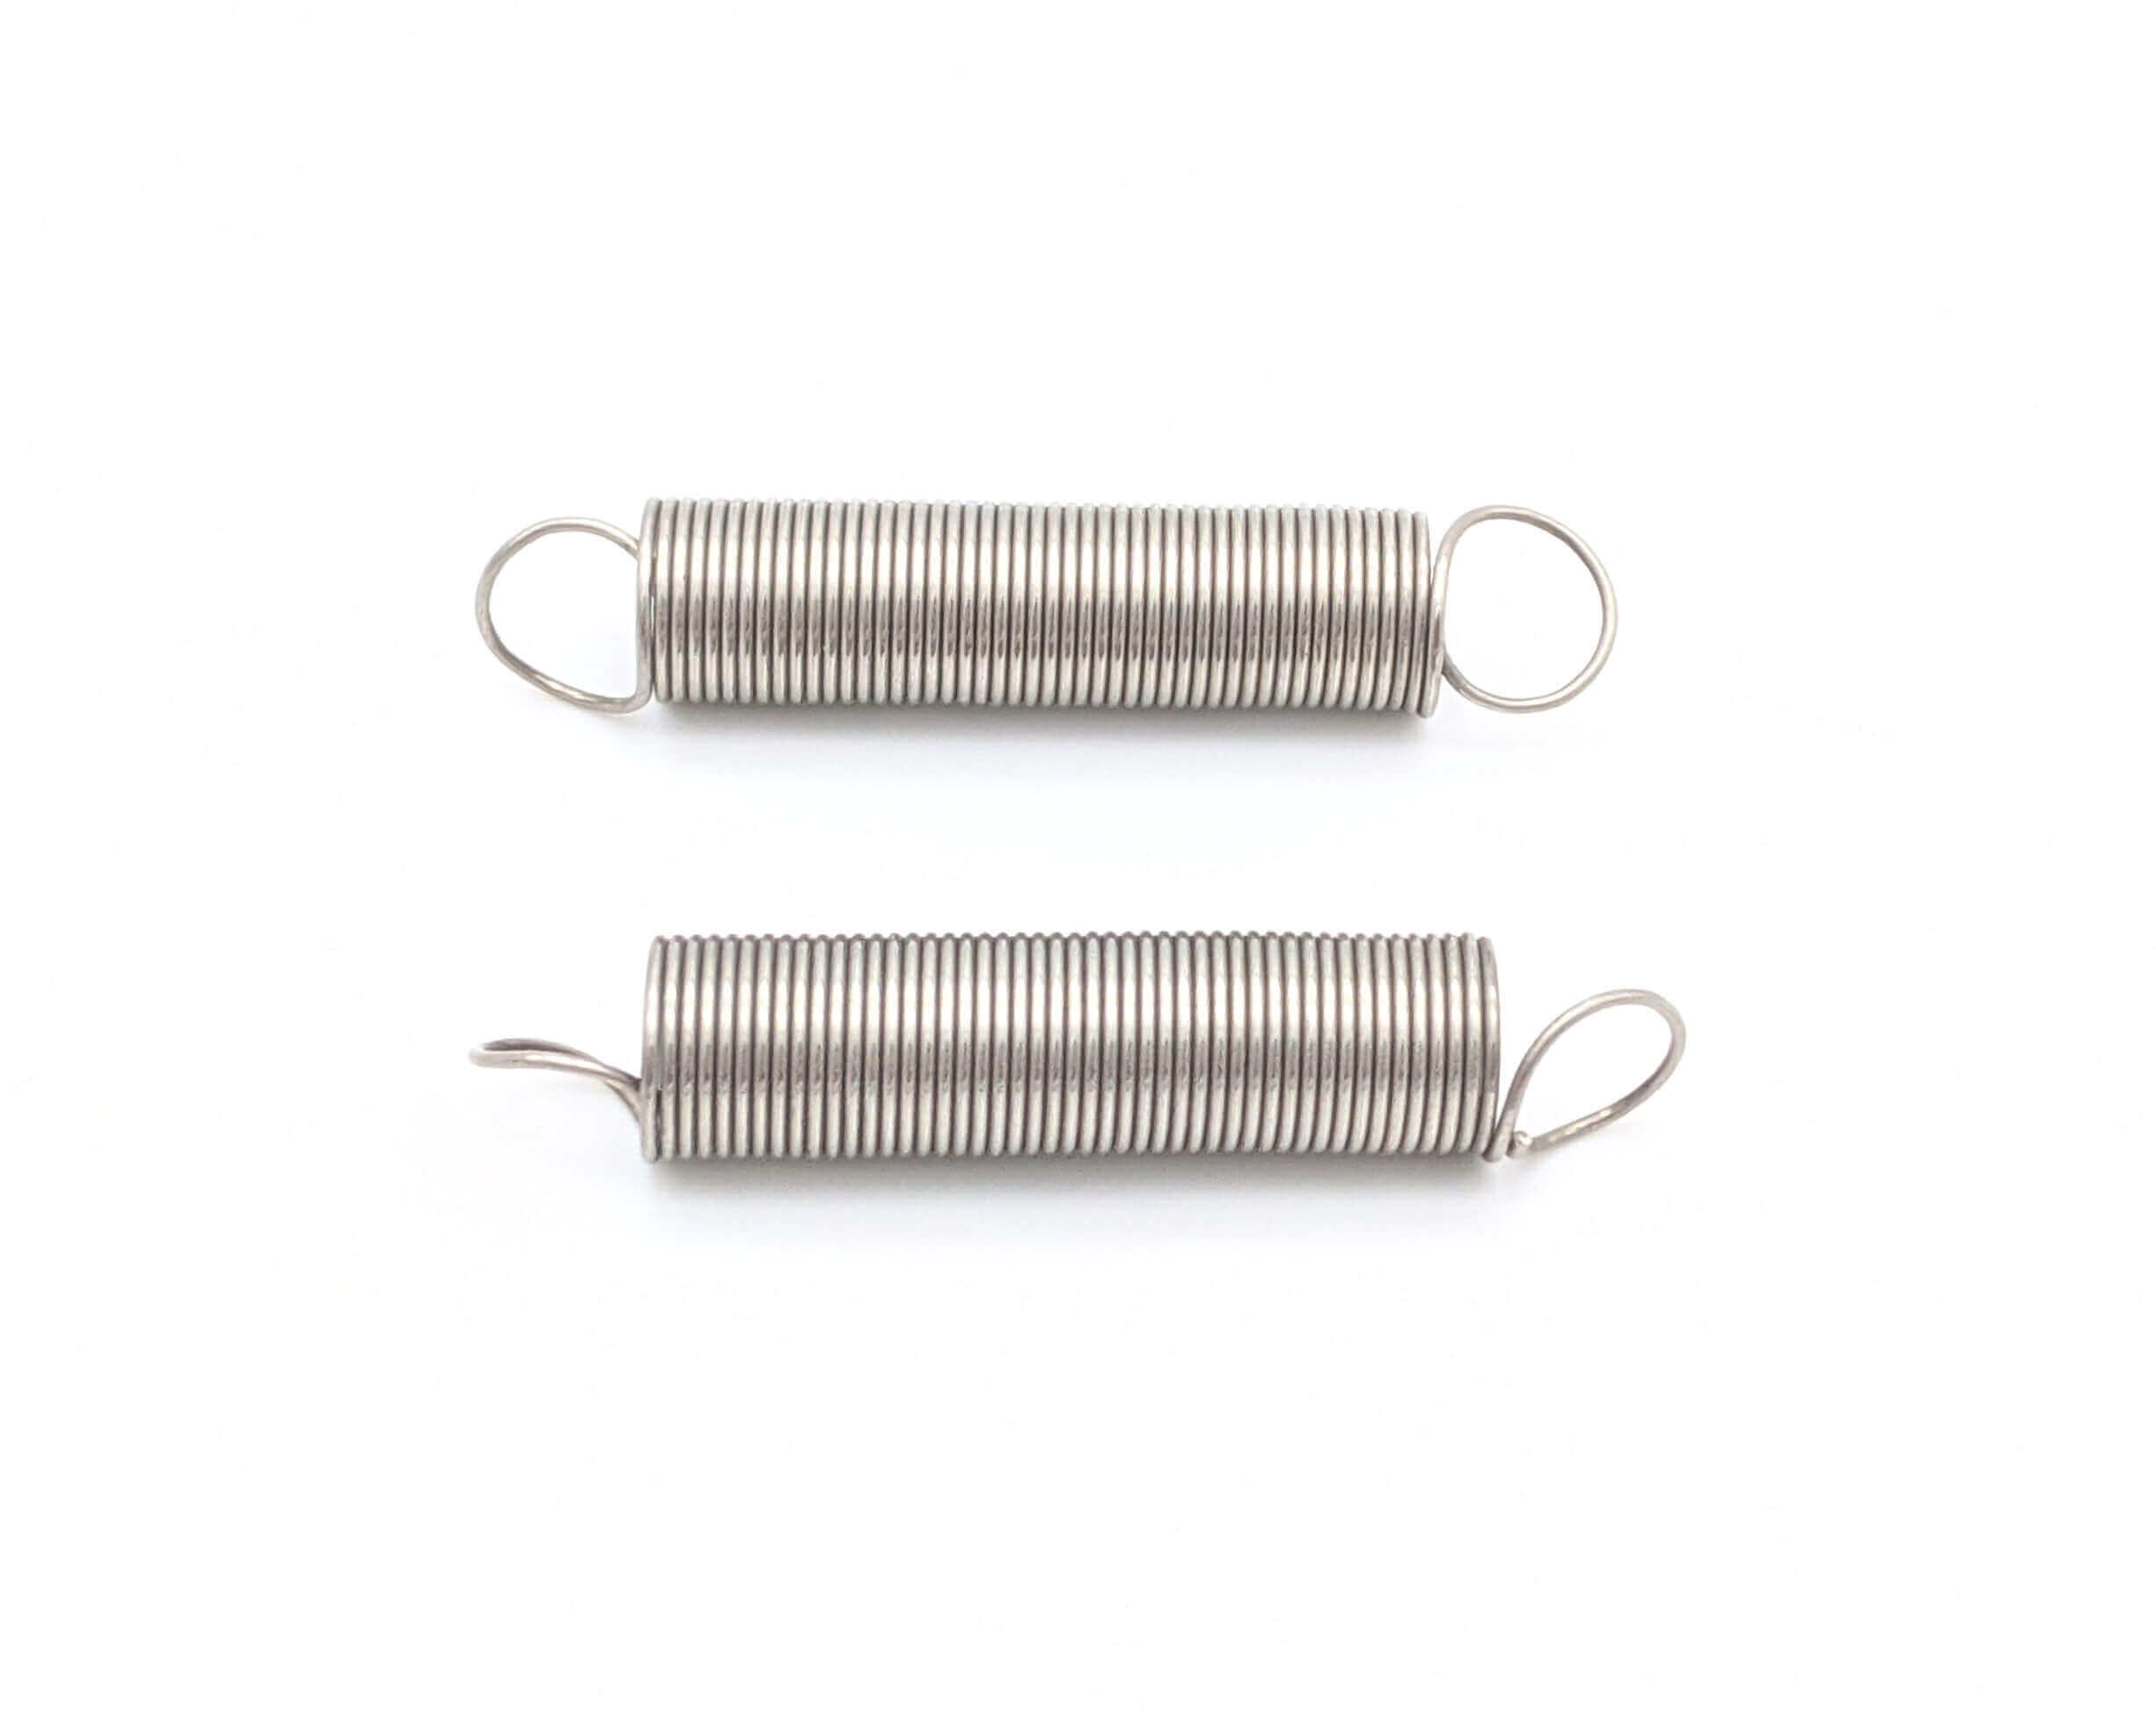 High strength Custom Steel Extension Spring,With Hooks Big Coil Tension Spring,2mm Wire Diameter*19mm Out Diameter* mm Length,2PCS 70-250 Length : 2x19x70mm Chenweiwei Hwqpq-Springs Pins 